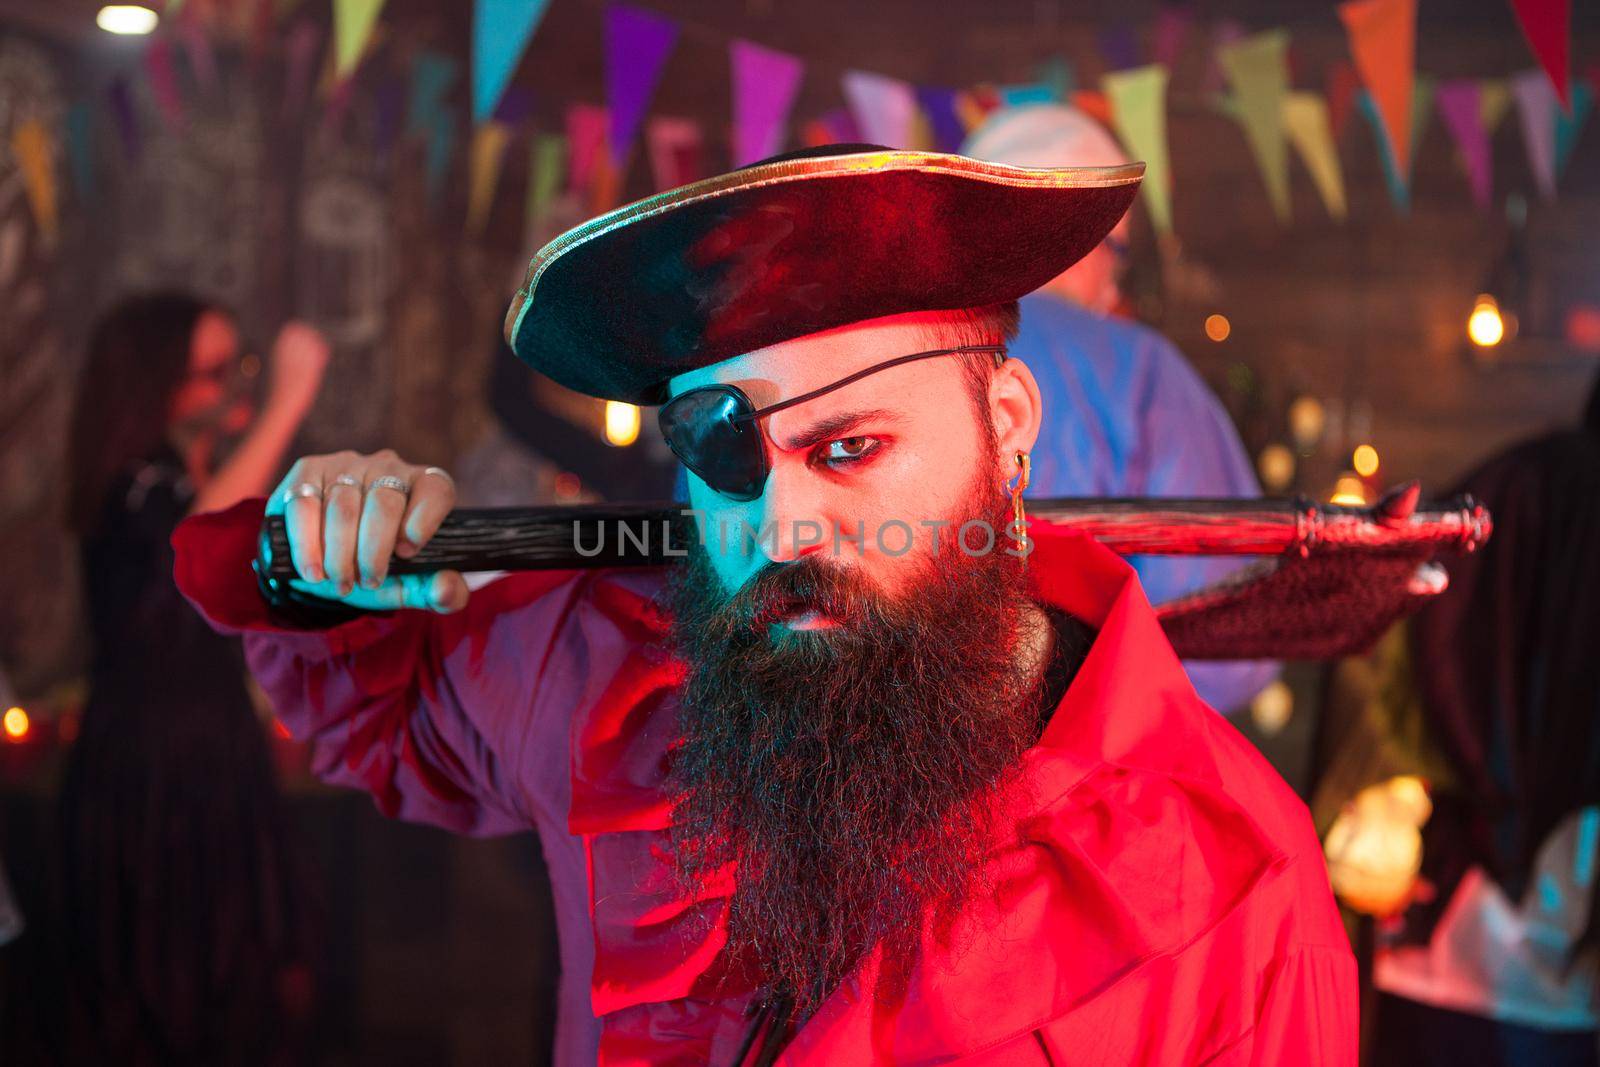 Angry pirate celebrating halloween with his friends. Man dressed up like a pirate with a big hat.